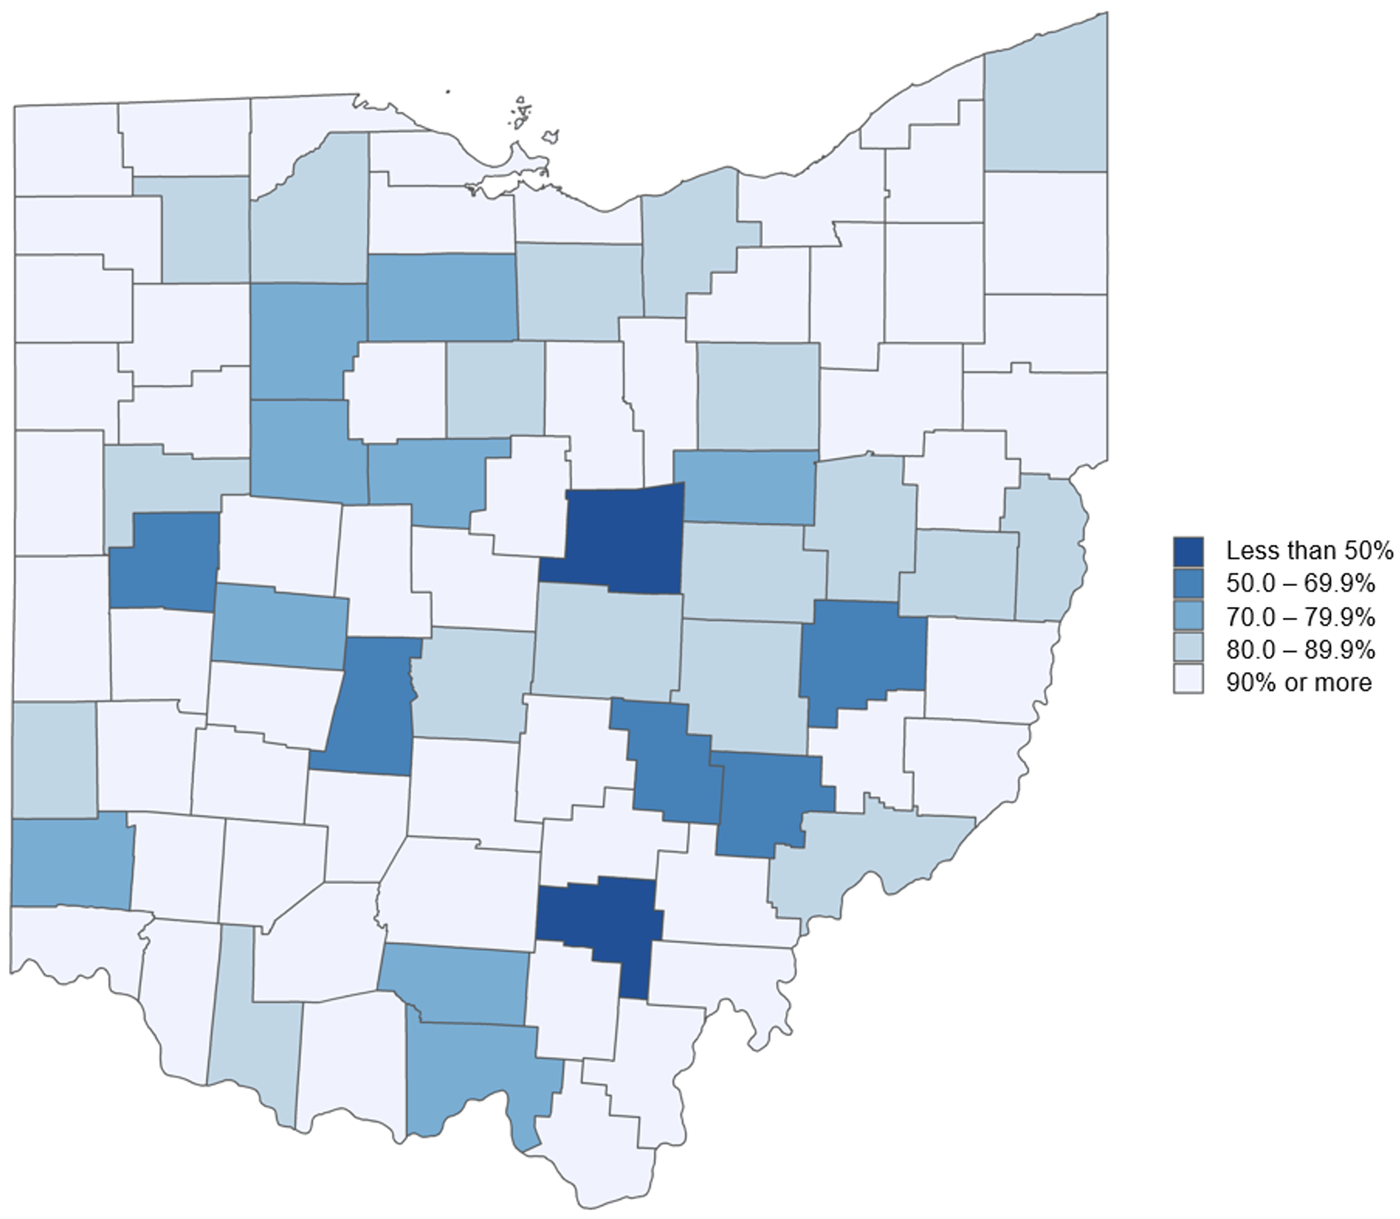 Map of Ohio that shows the average percentage of students’ access to technology devices across counties.